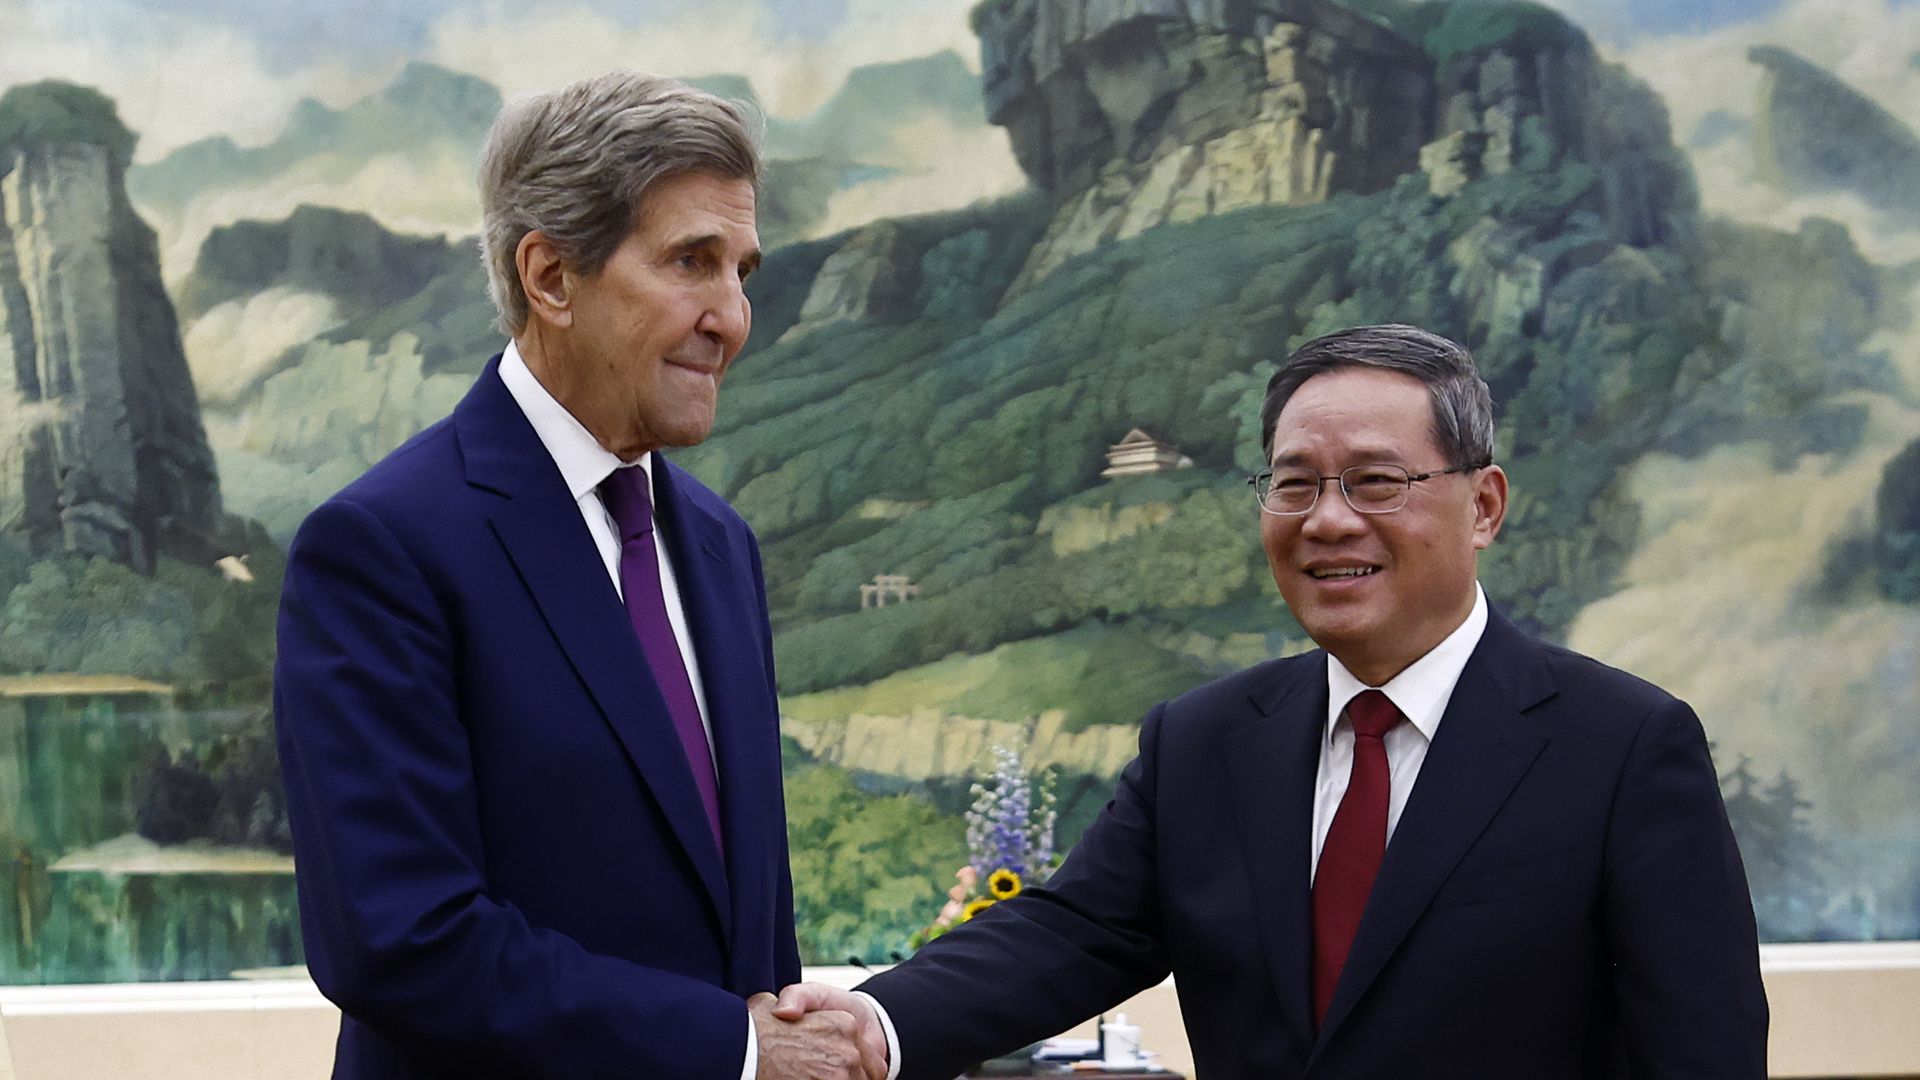 U.S. climate envoy John Kerry (L) is greeted by Chinese Premier Li Qiang for climate talks in Beijing.